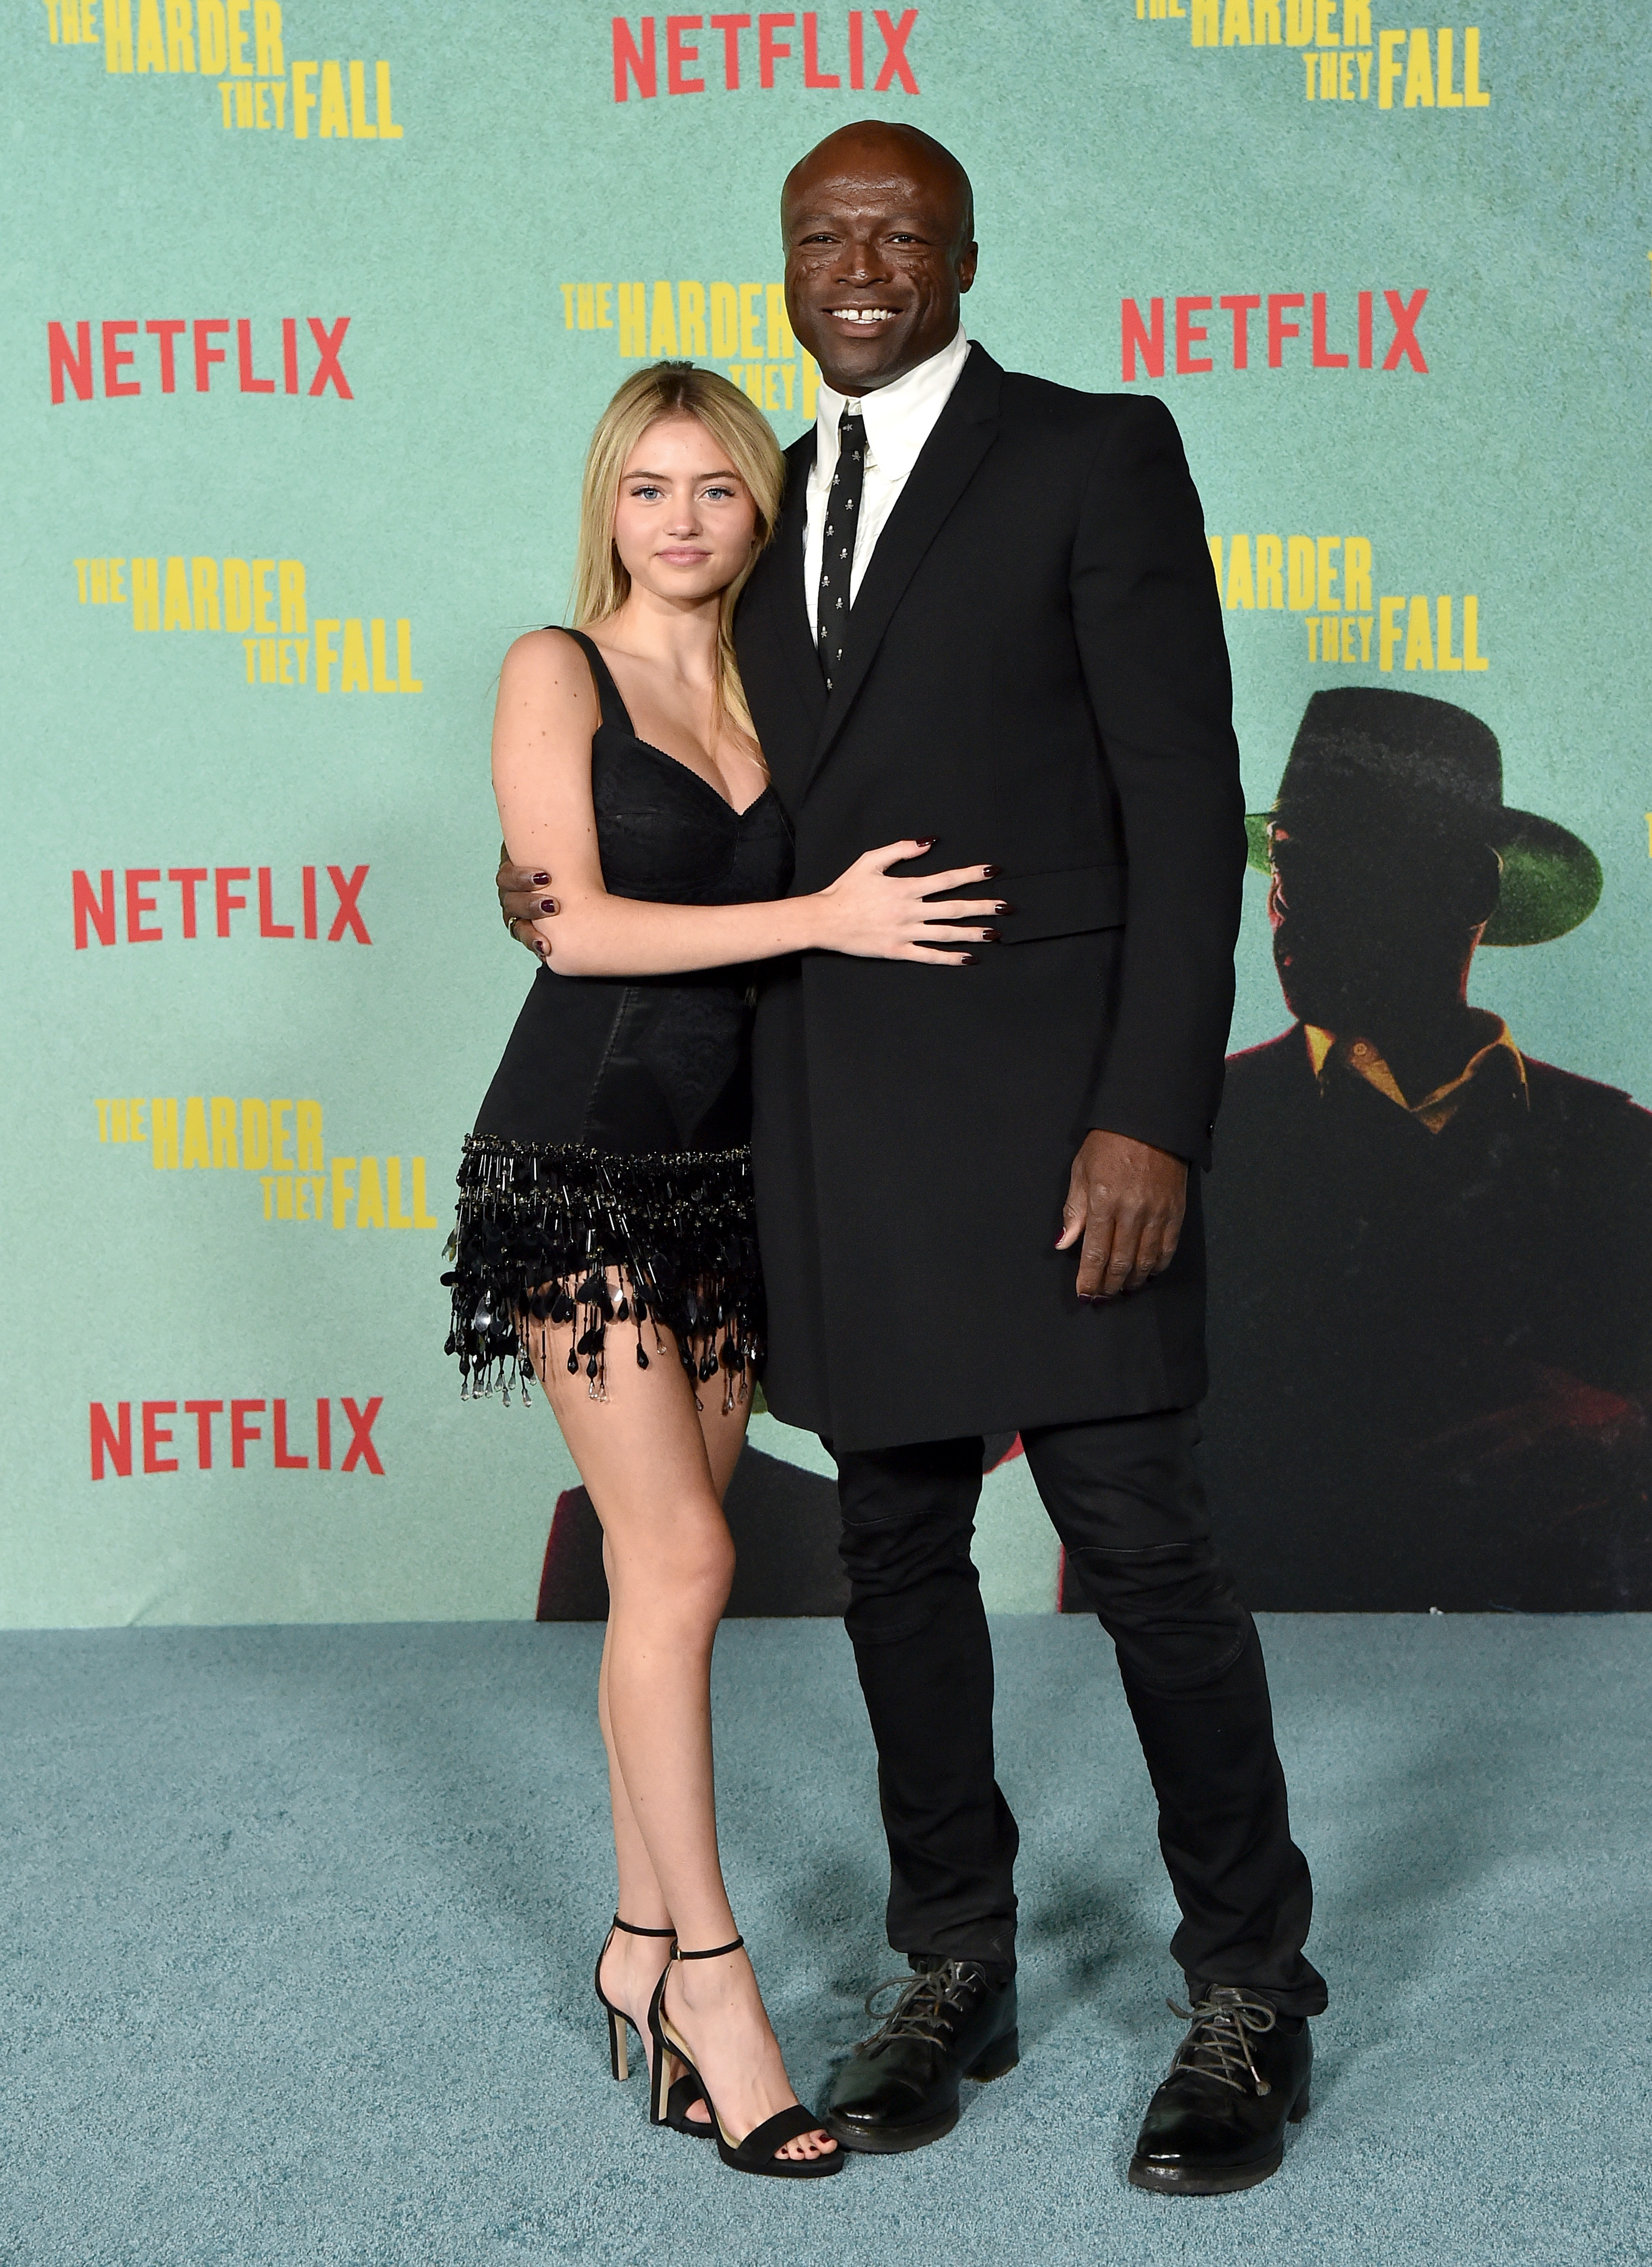 Leni Olumi Klum and Seal at the premiere of "The Harder They Fall" in Los Angeles, California in 2021. | Source: Getty Images